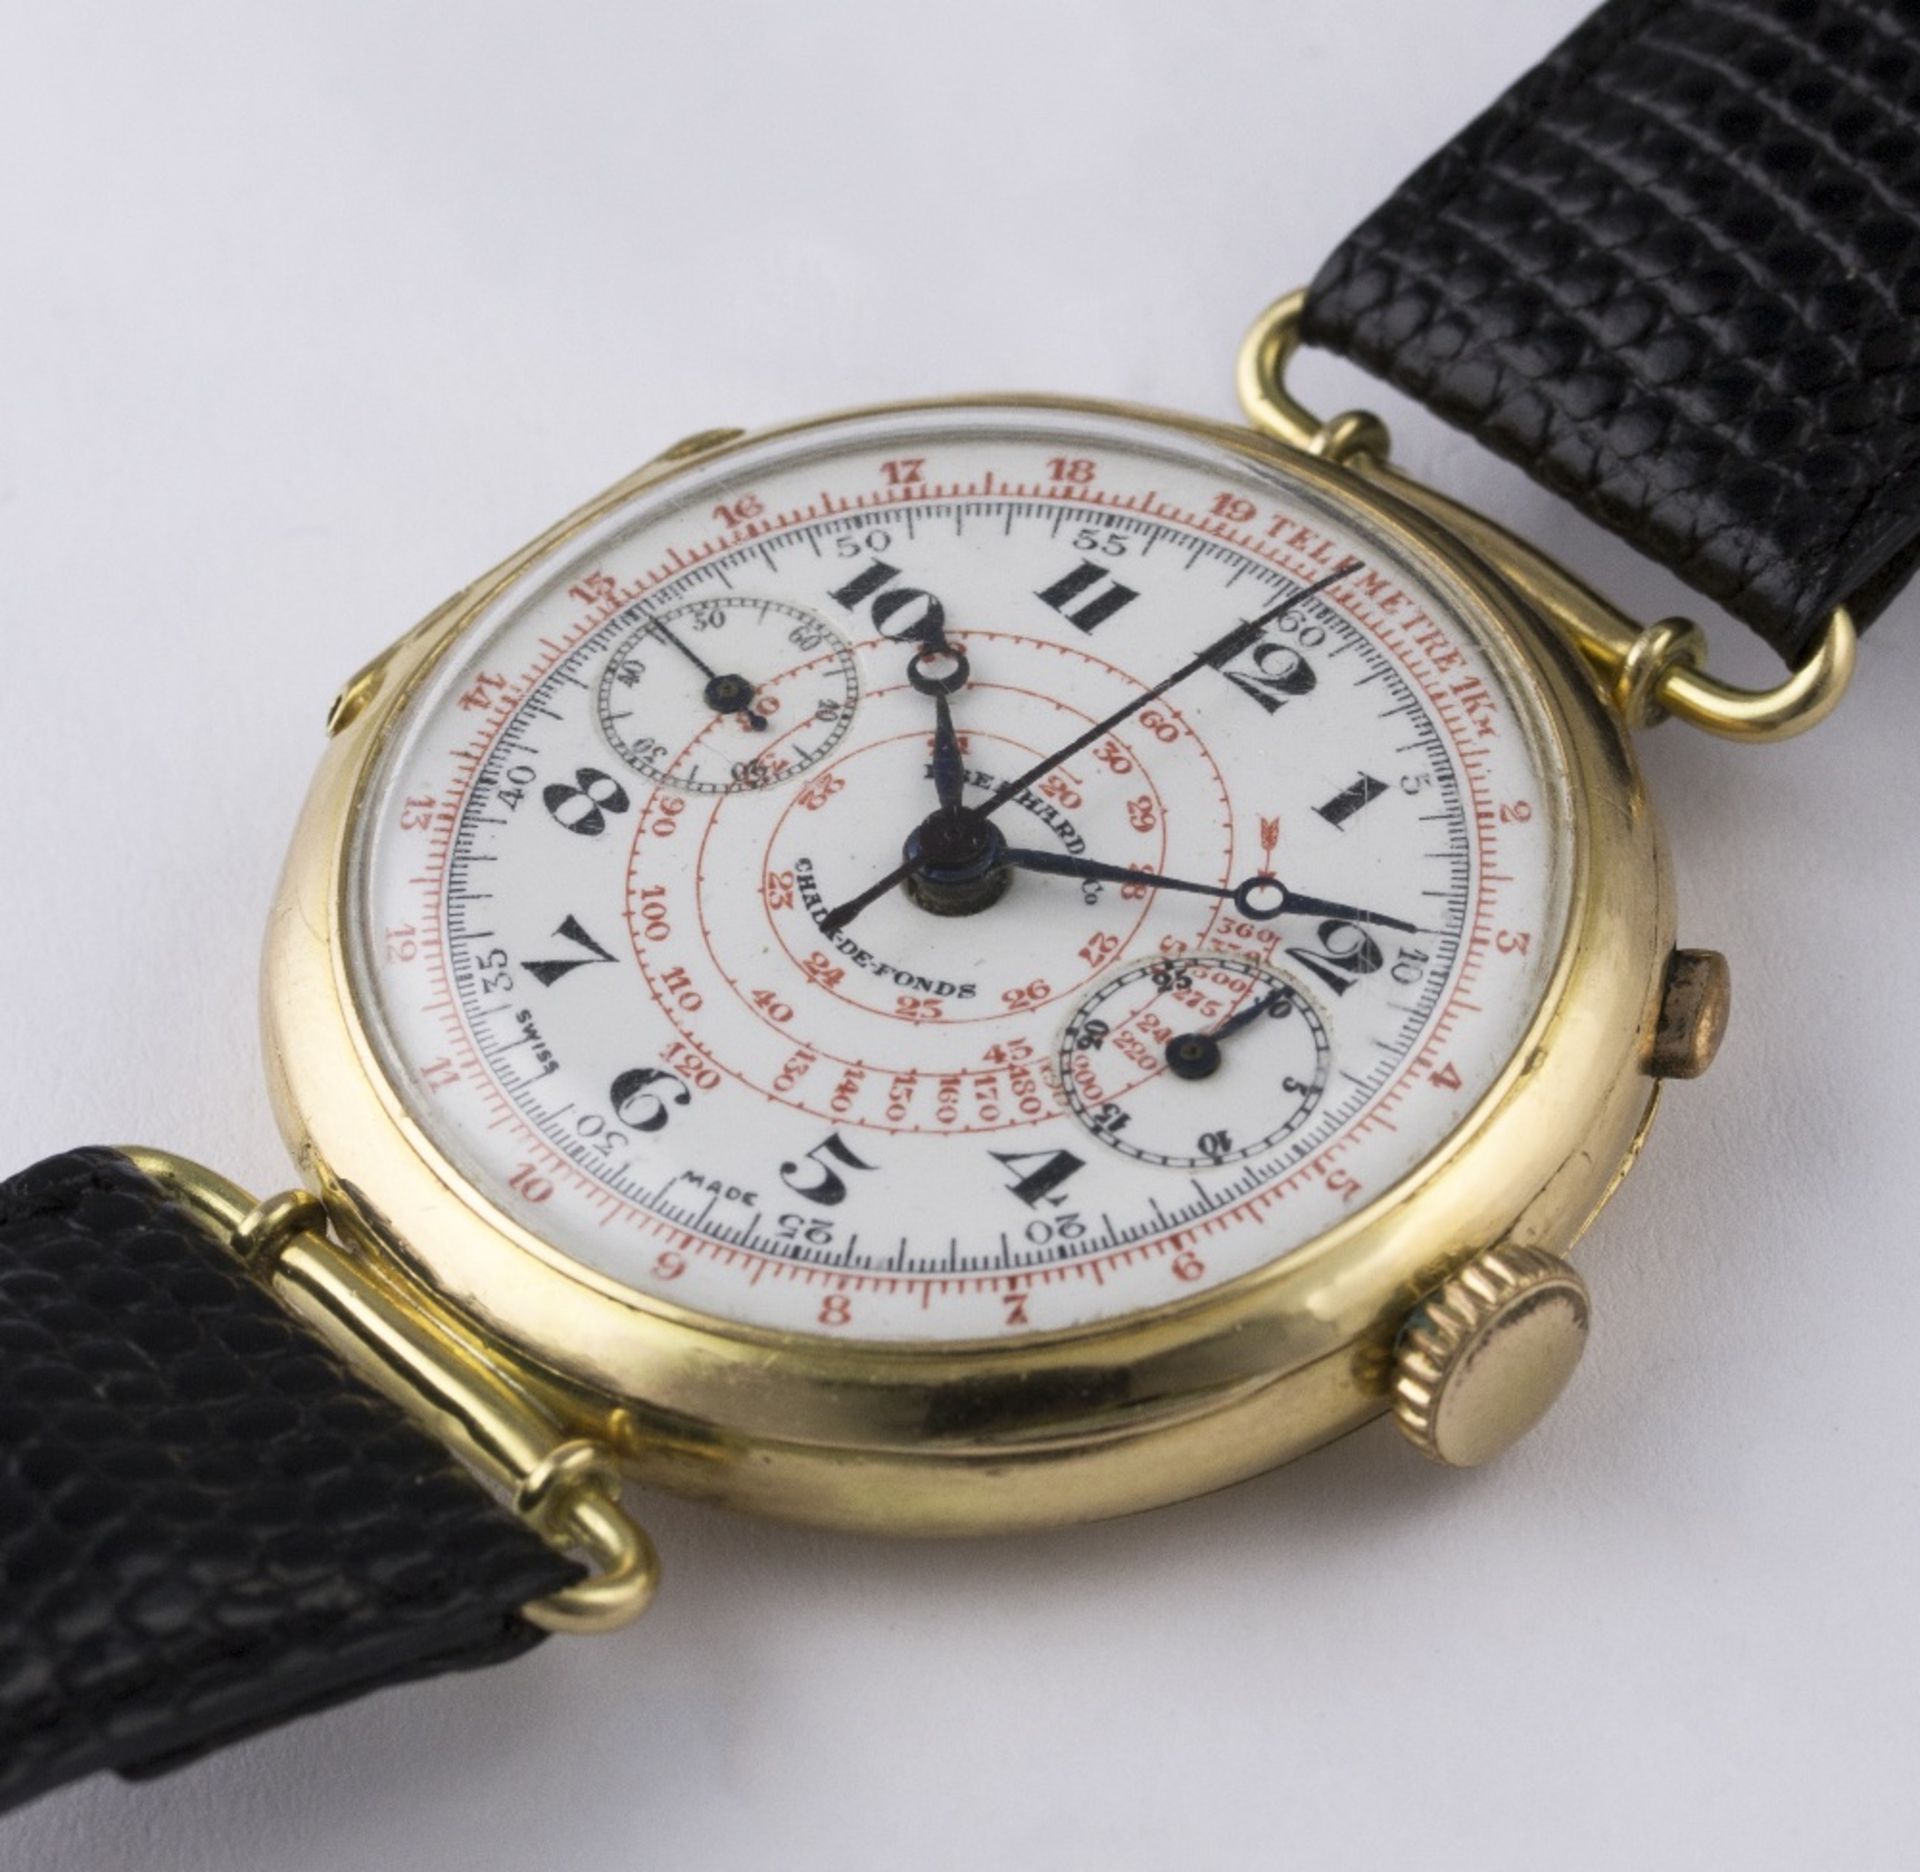 A GENTLEMAN'S 18K SOLID GOLD EBERHARD & CO SINGLE BUTTON CHRONOGRAPH WRIST WATCH CIRCA 1930s D: - Image 3 of 8